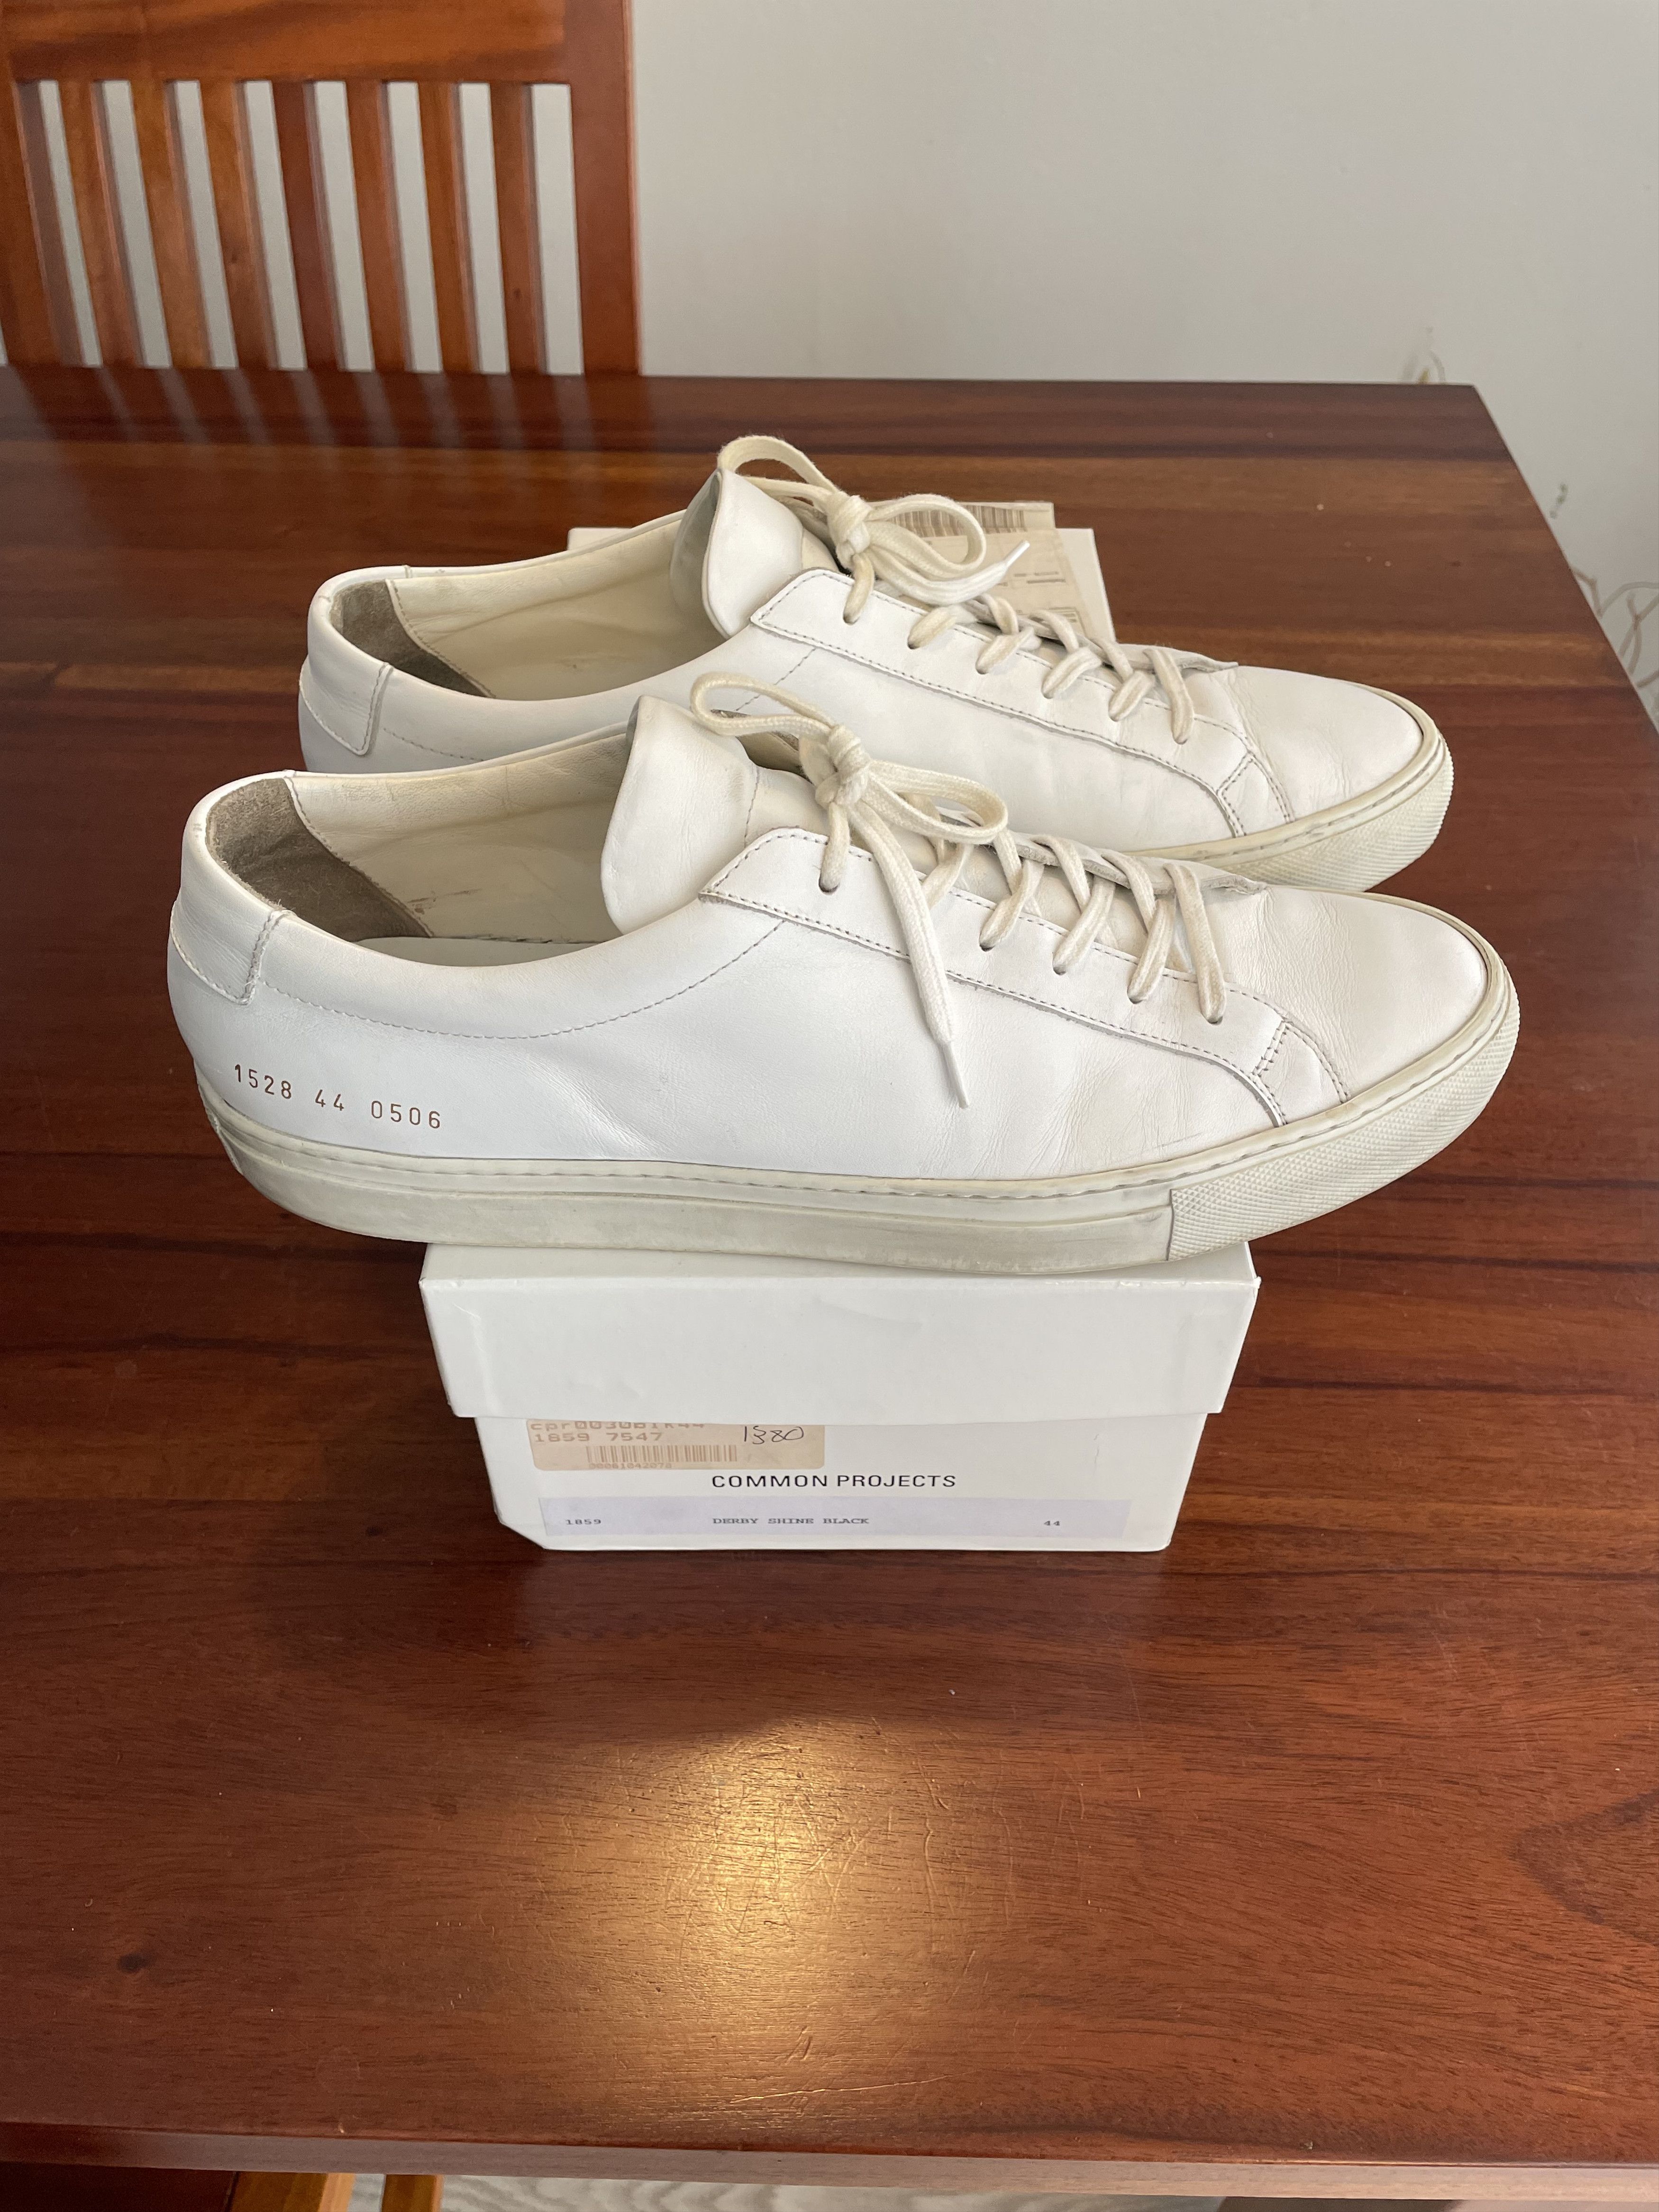 Common Projects Common Projects Achilles Low White Size US 11 / EU 44 - 1 Preview